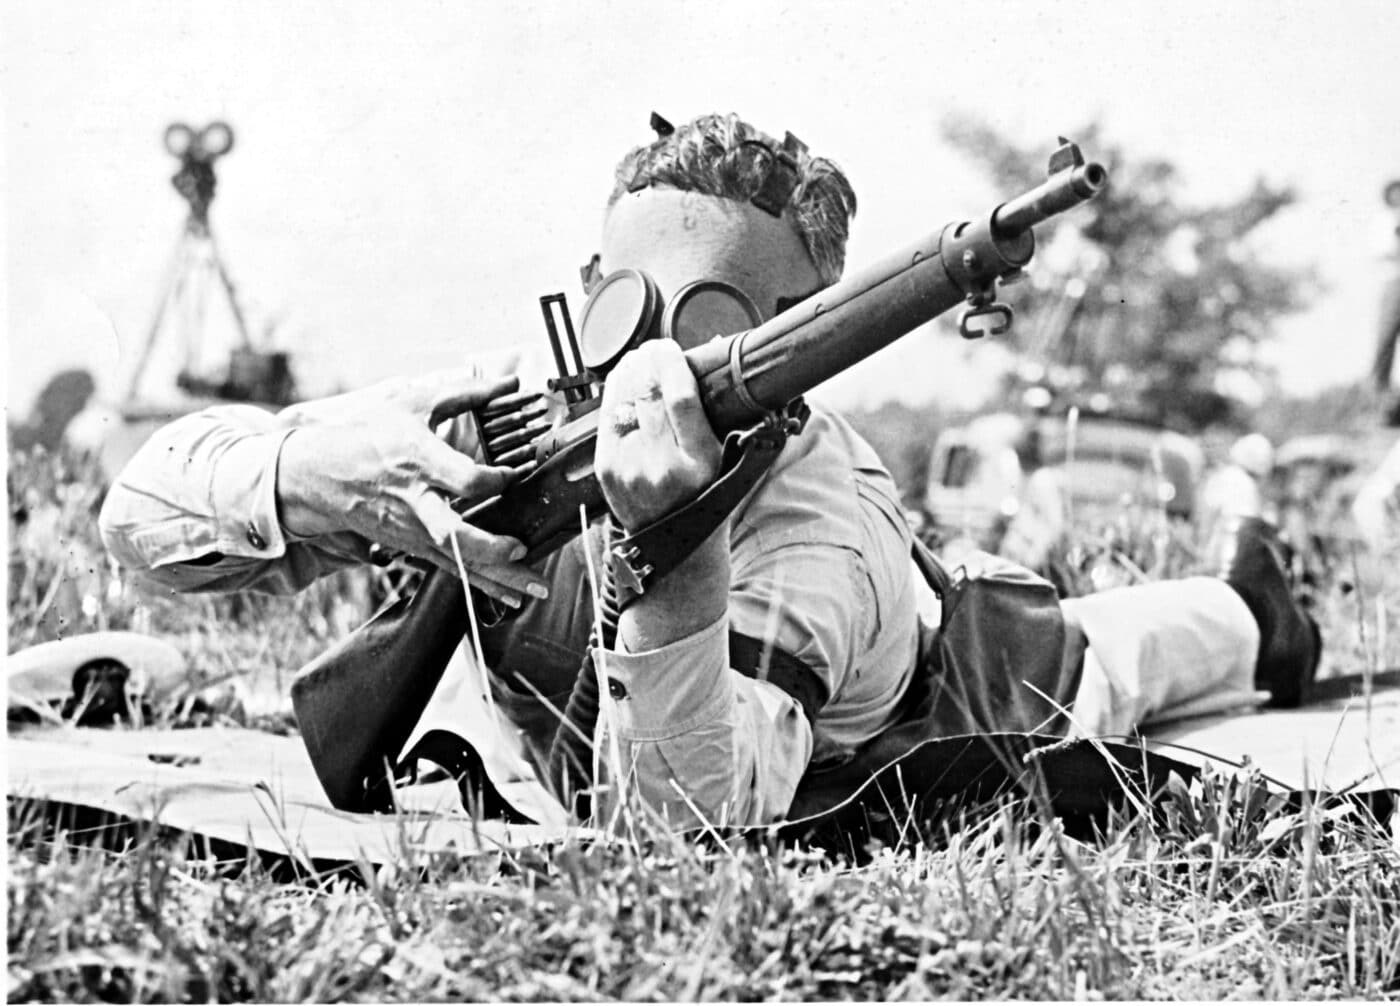 Soldier using M1903 at US Army Chemical Warfare Training Center at Edgewood Arsenal in July 1939